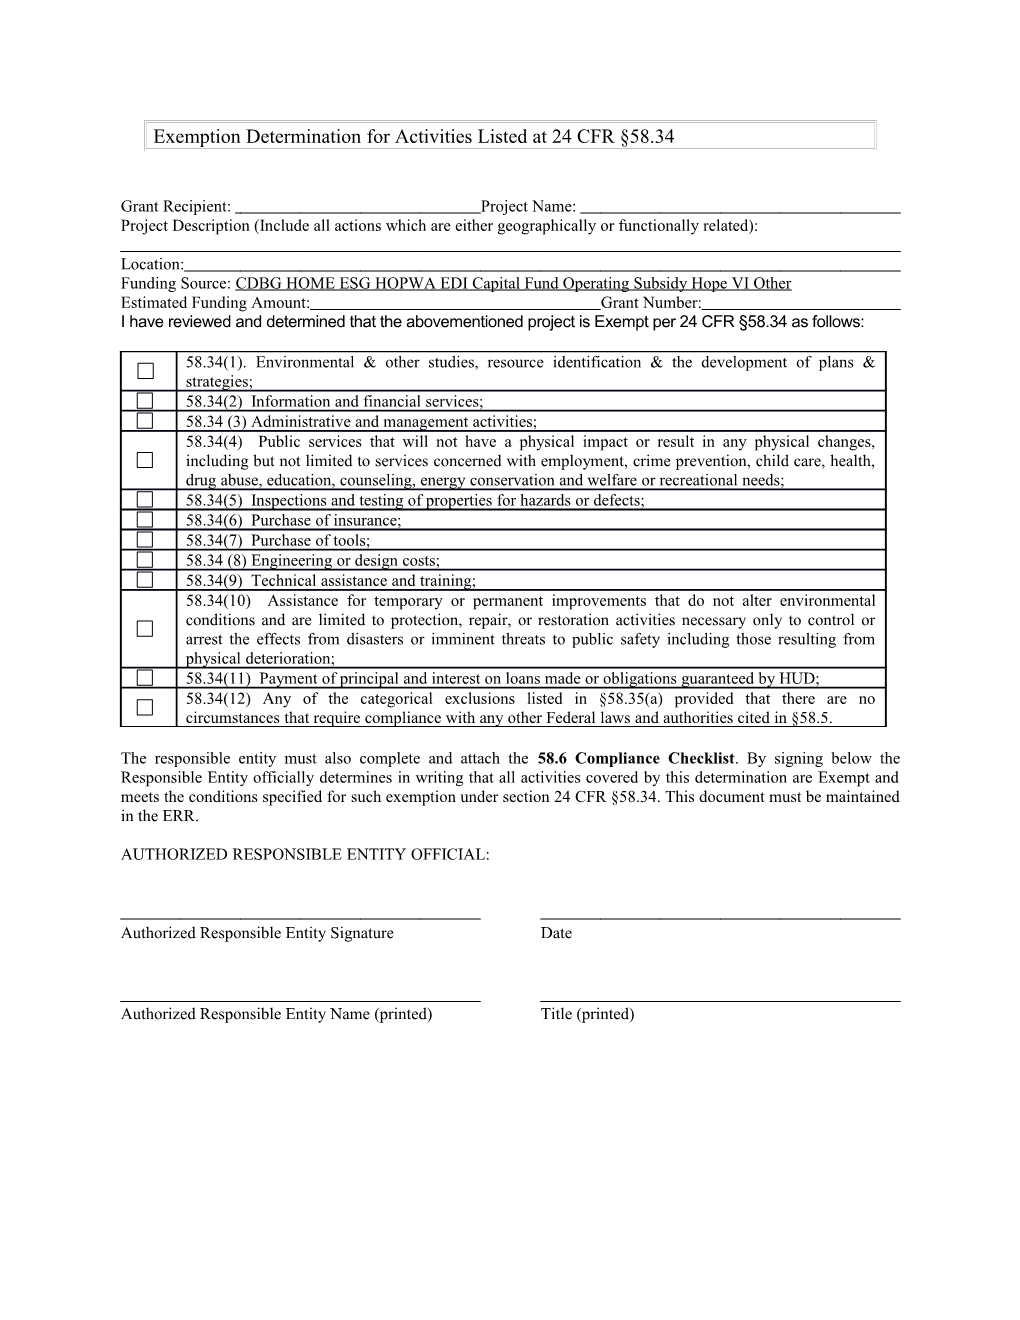 Exemption Determination for Activities Listed at 24 CFR 58.34 s1